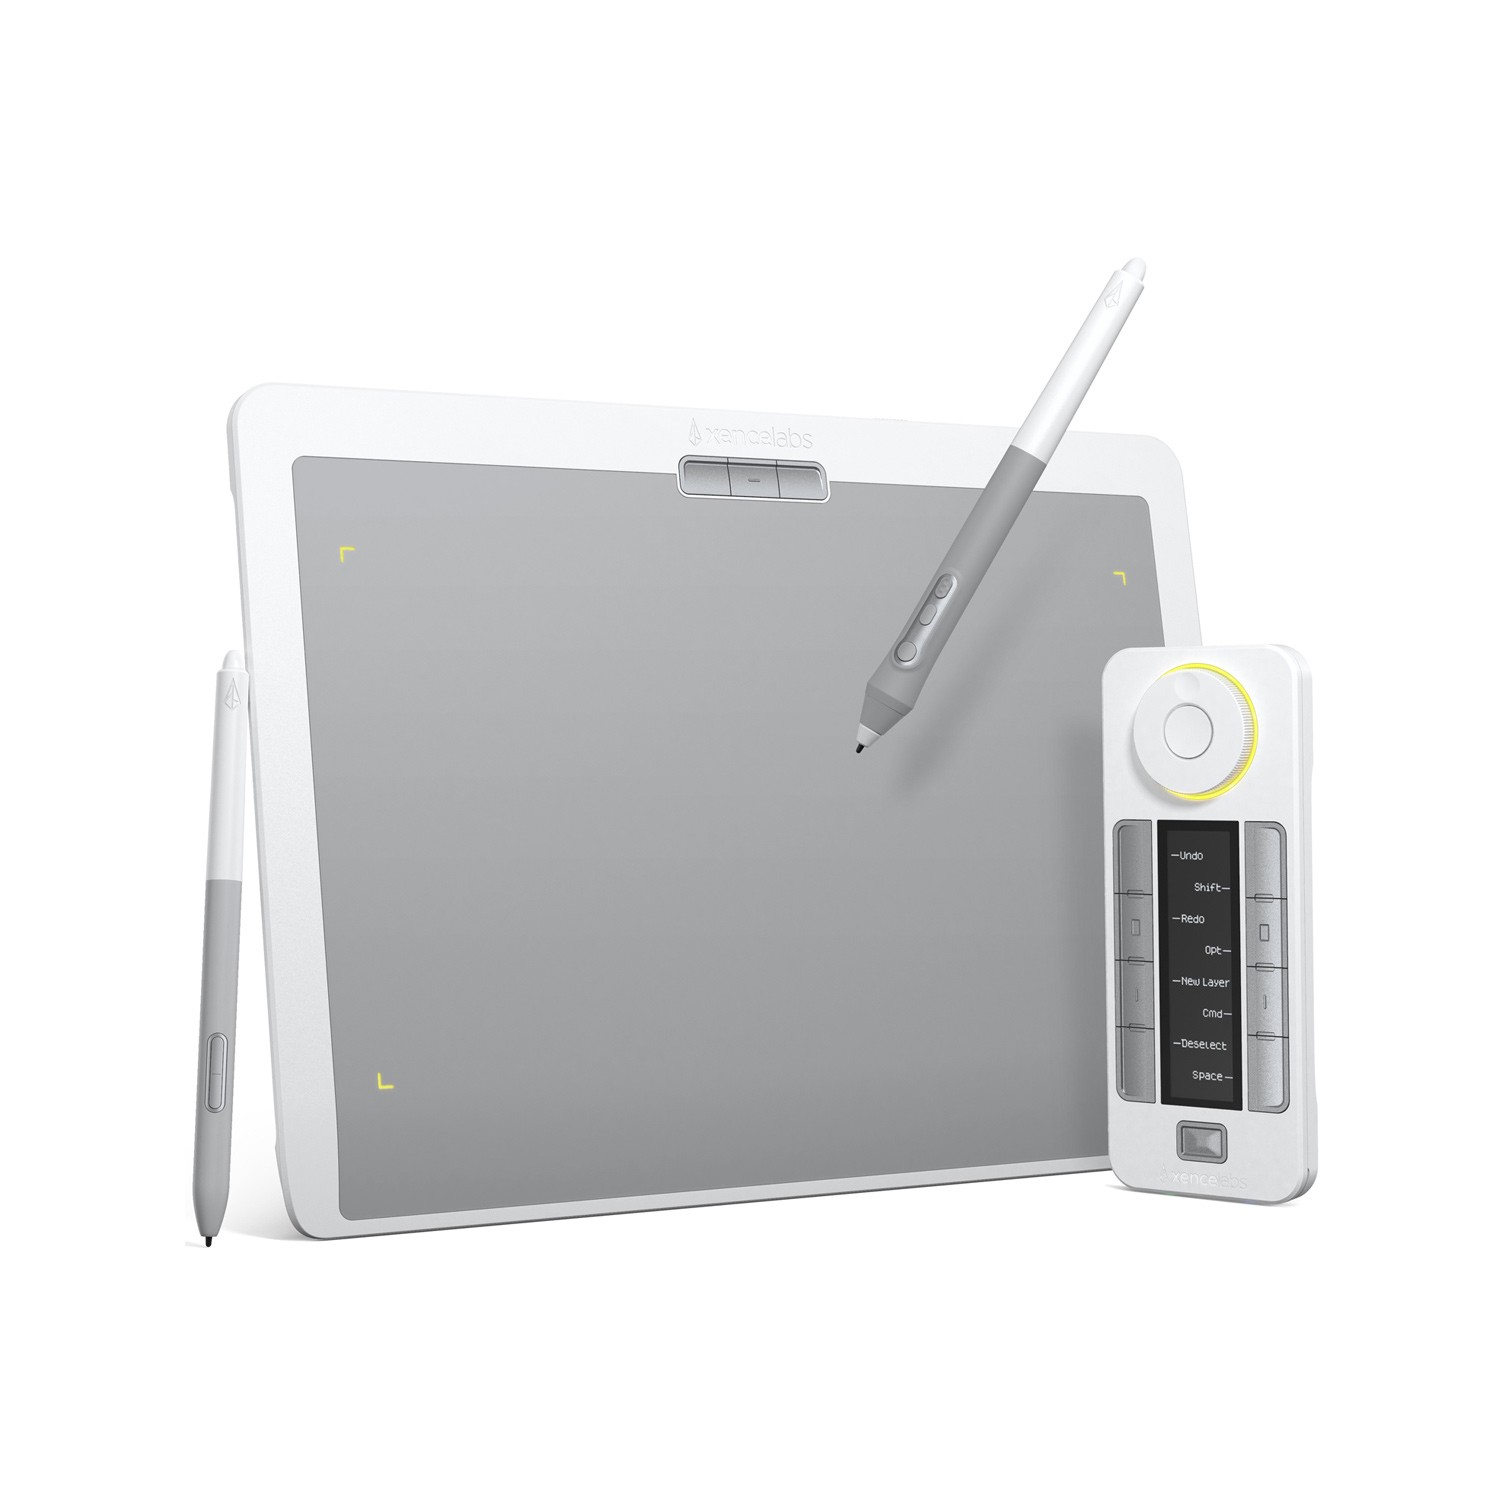 Amazon.com: SereneLife Graphic Tablet with Passive Pen - 15.6